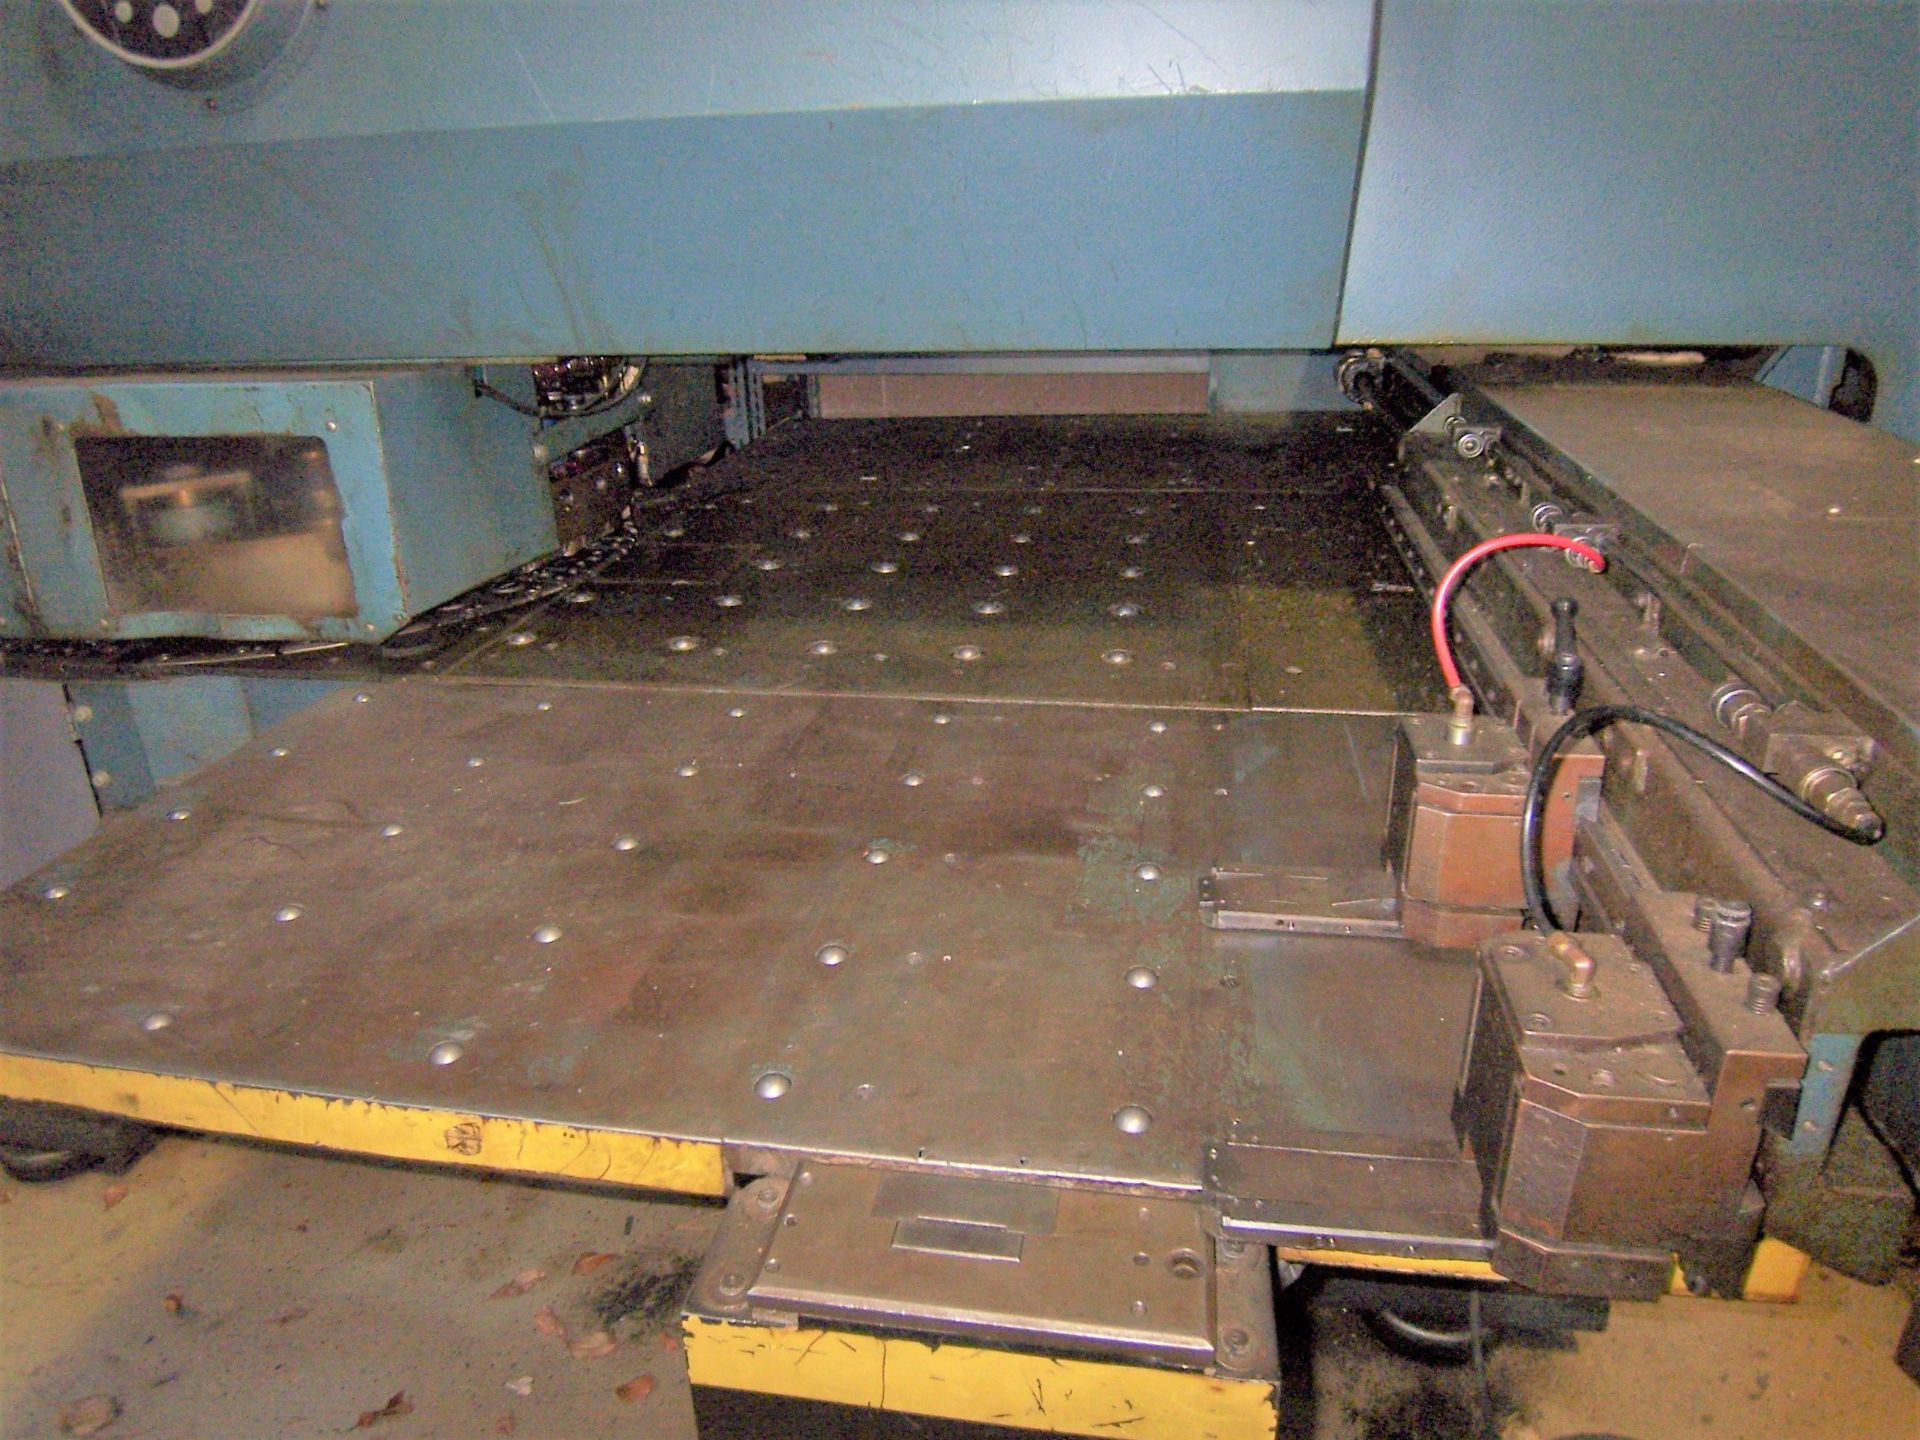 30 TON AMADA MDL. 345NCT CNC TURRET PUNCH, 44-STATION TURRET, [2] AUTO INDEXING STATIONS, FANUC - Image 5 of 6